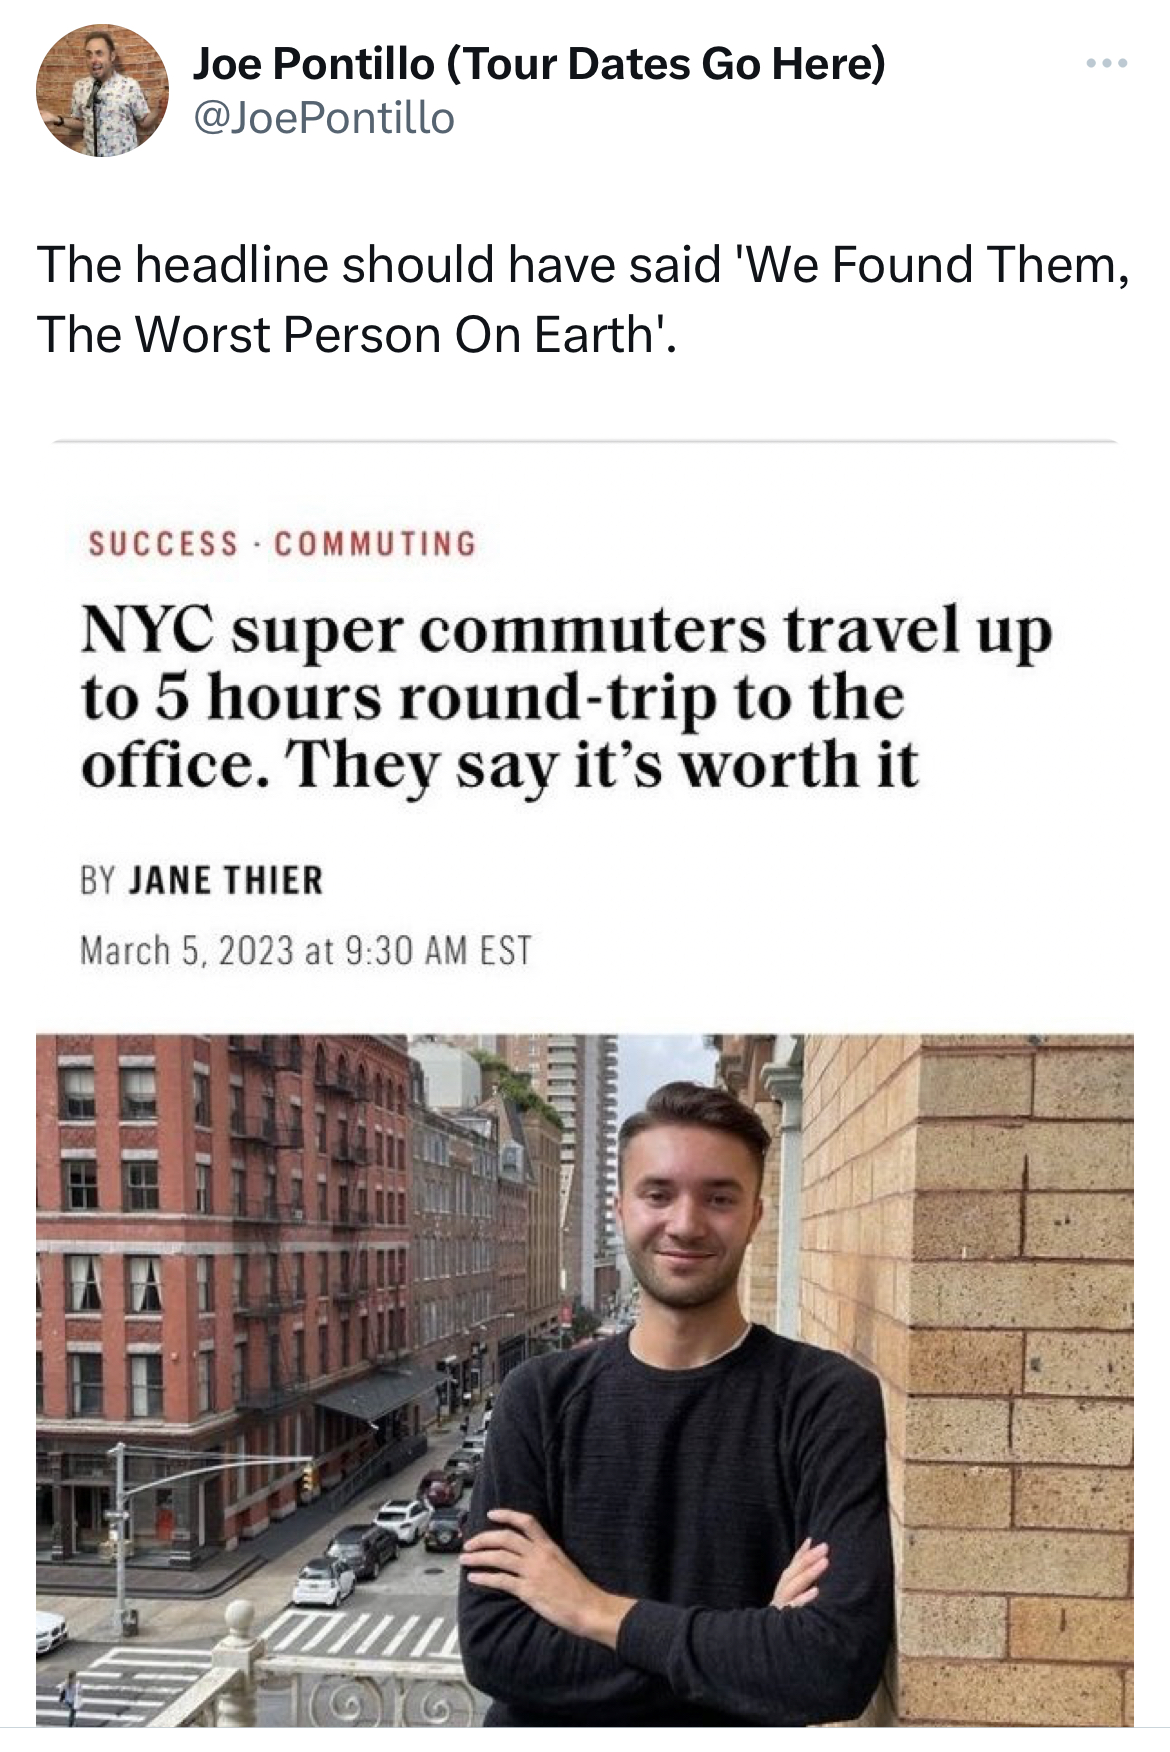 savage tweets - Magazine - Joe Pontillo Tour Dates Go Here The headline should have said 'We Found Them, The Worst Person On Earth'. Success Commuting Nyc super commuters travel up to 5 hours roundtrip to the office. They say it's worth it By Jane Thier a